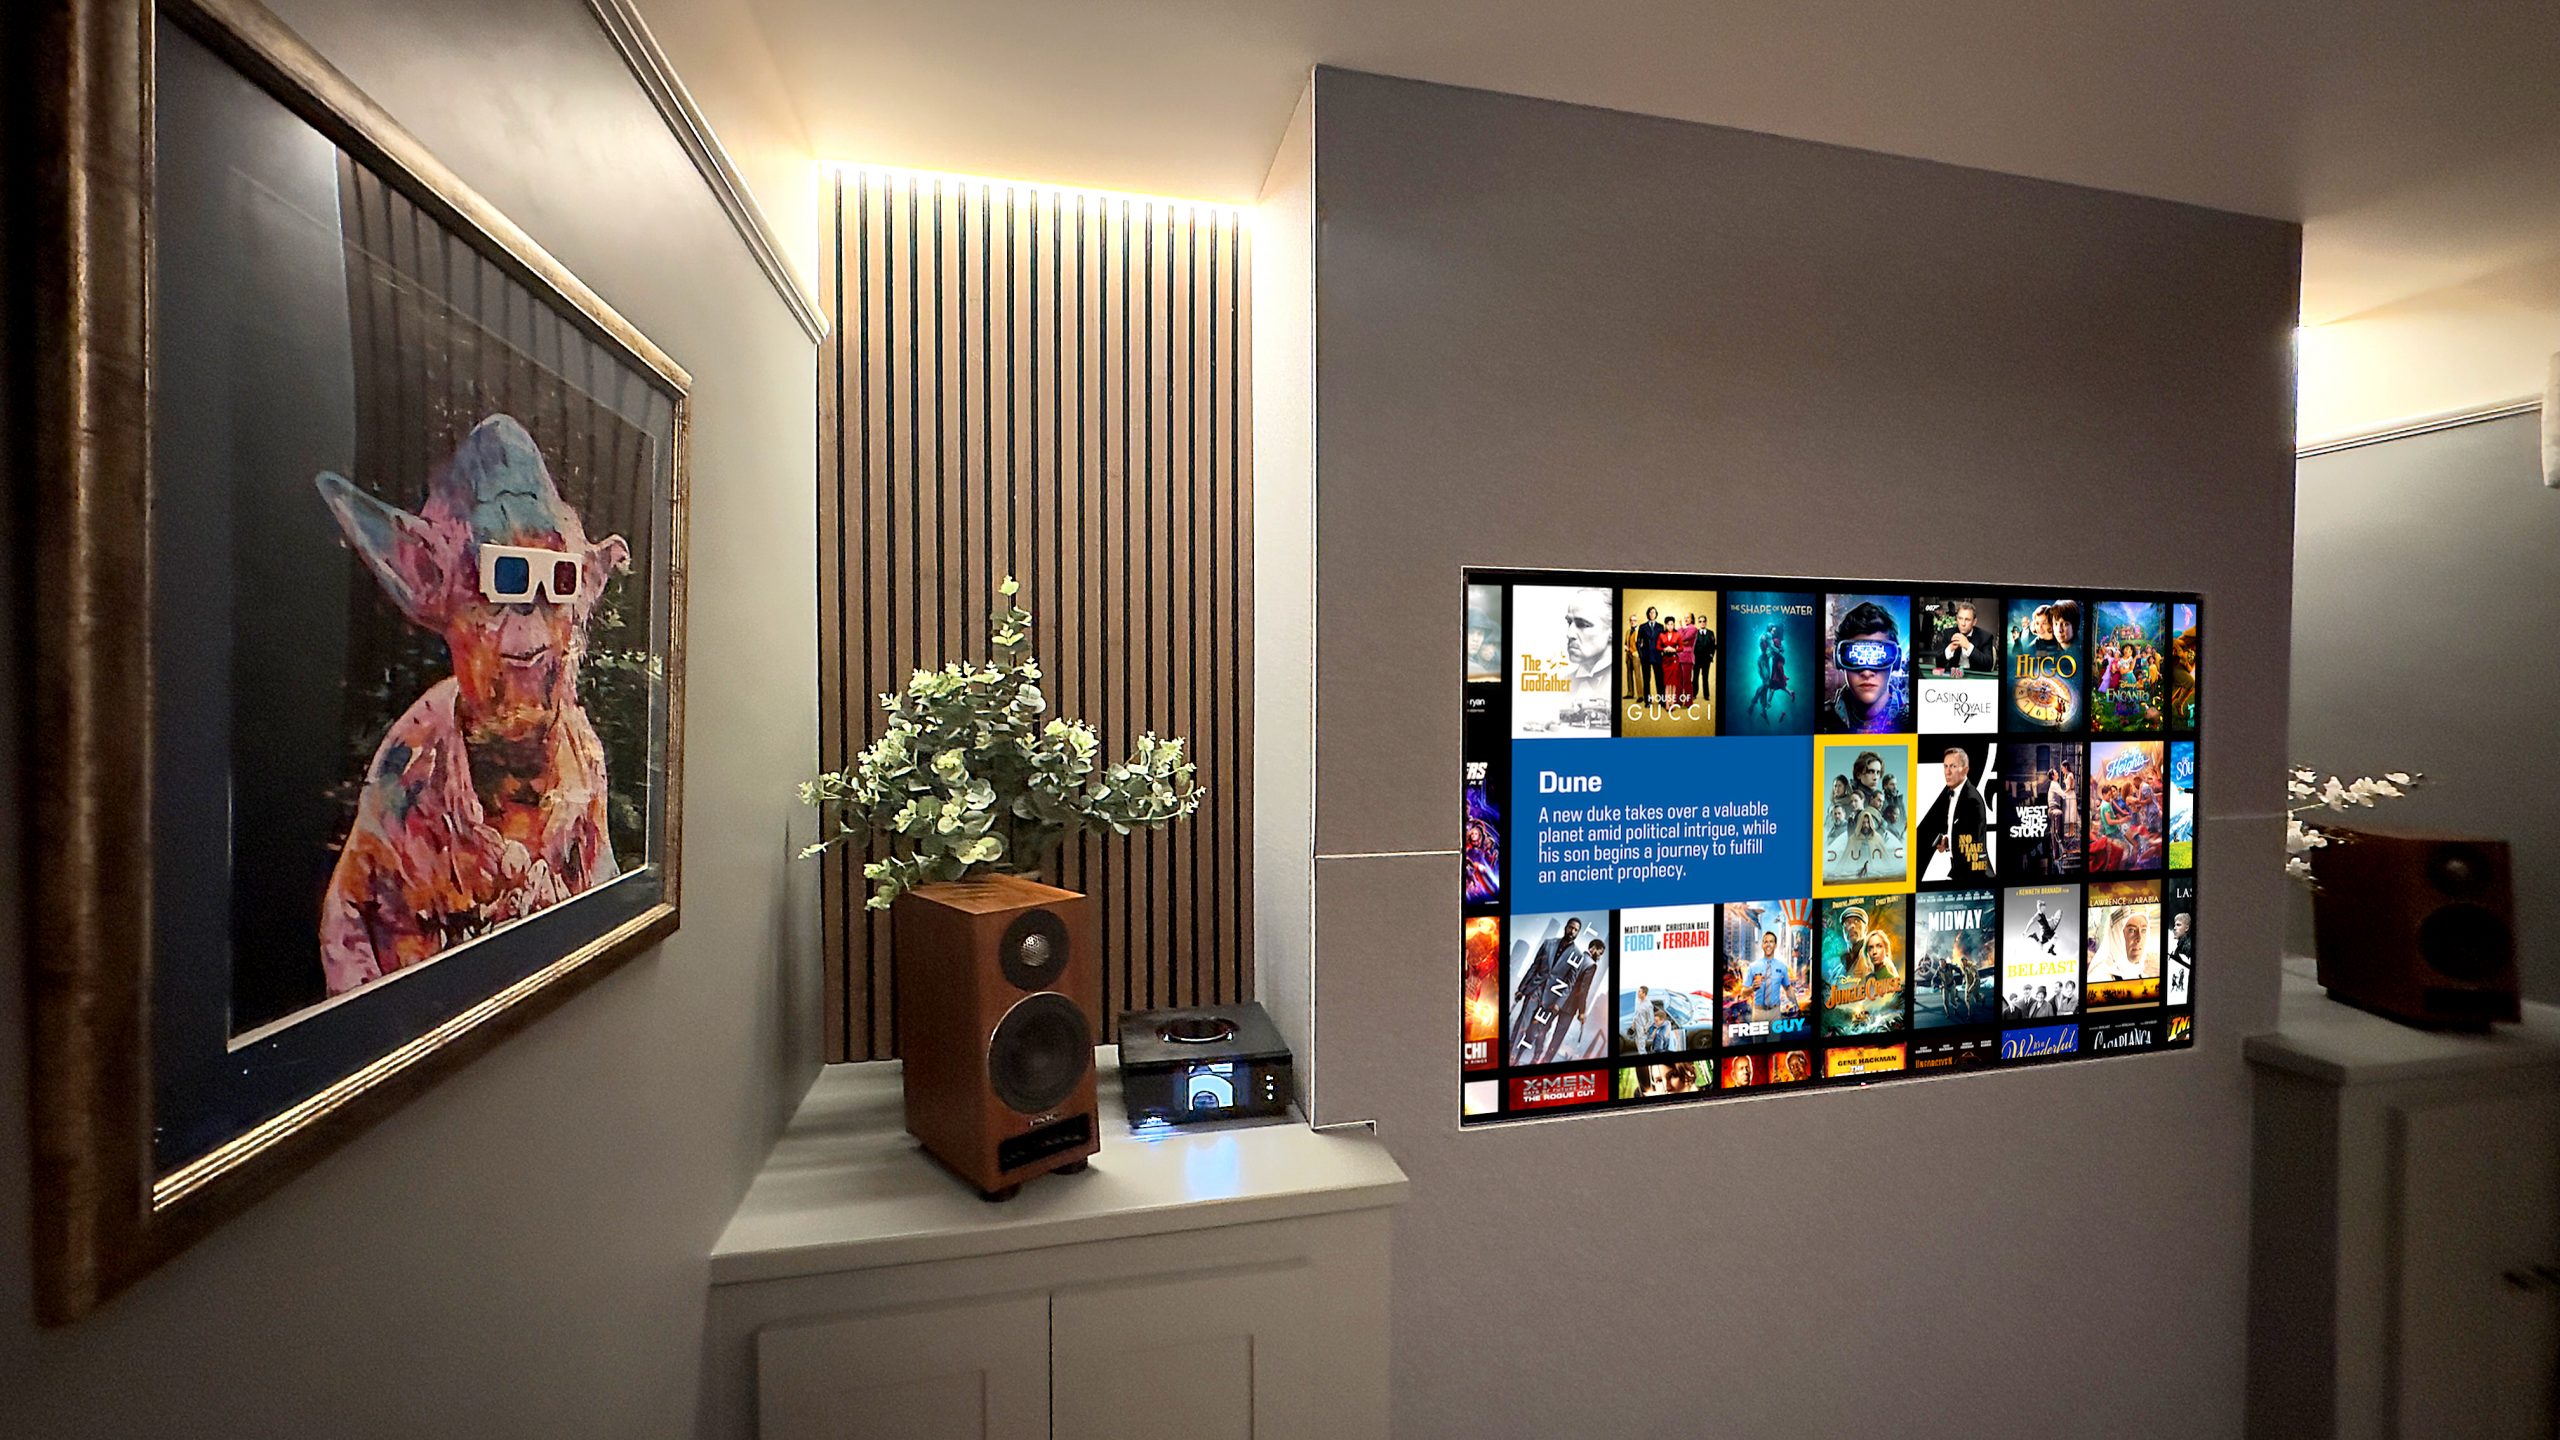 This small home cinema room provides immersive sound, in a small room. Image shows screen, acoustic panels and PMC speakers.